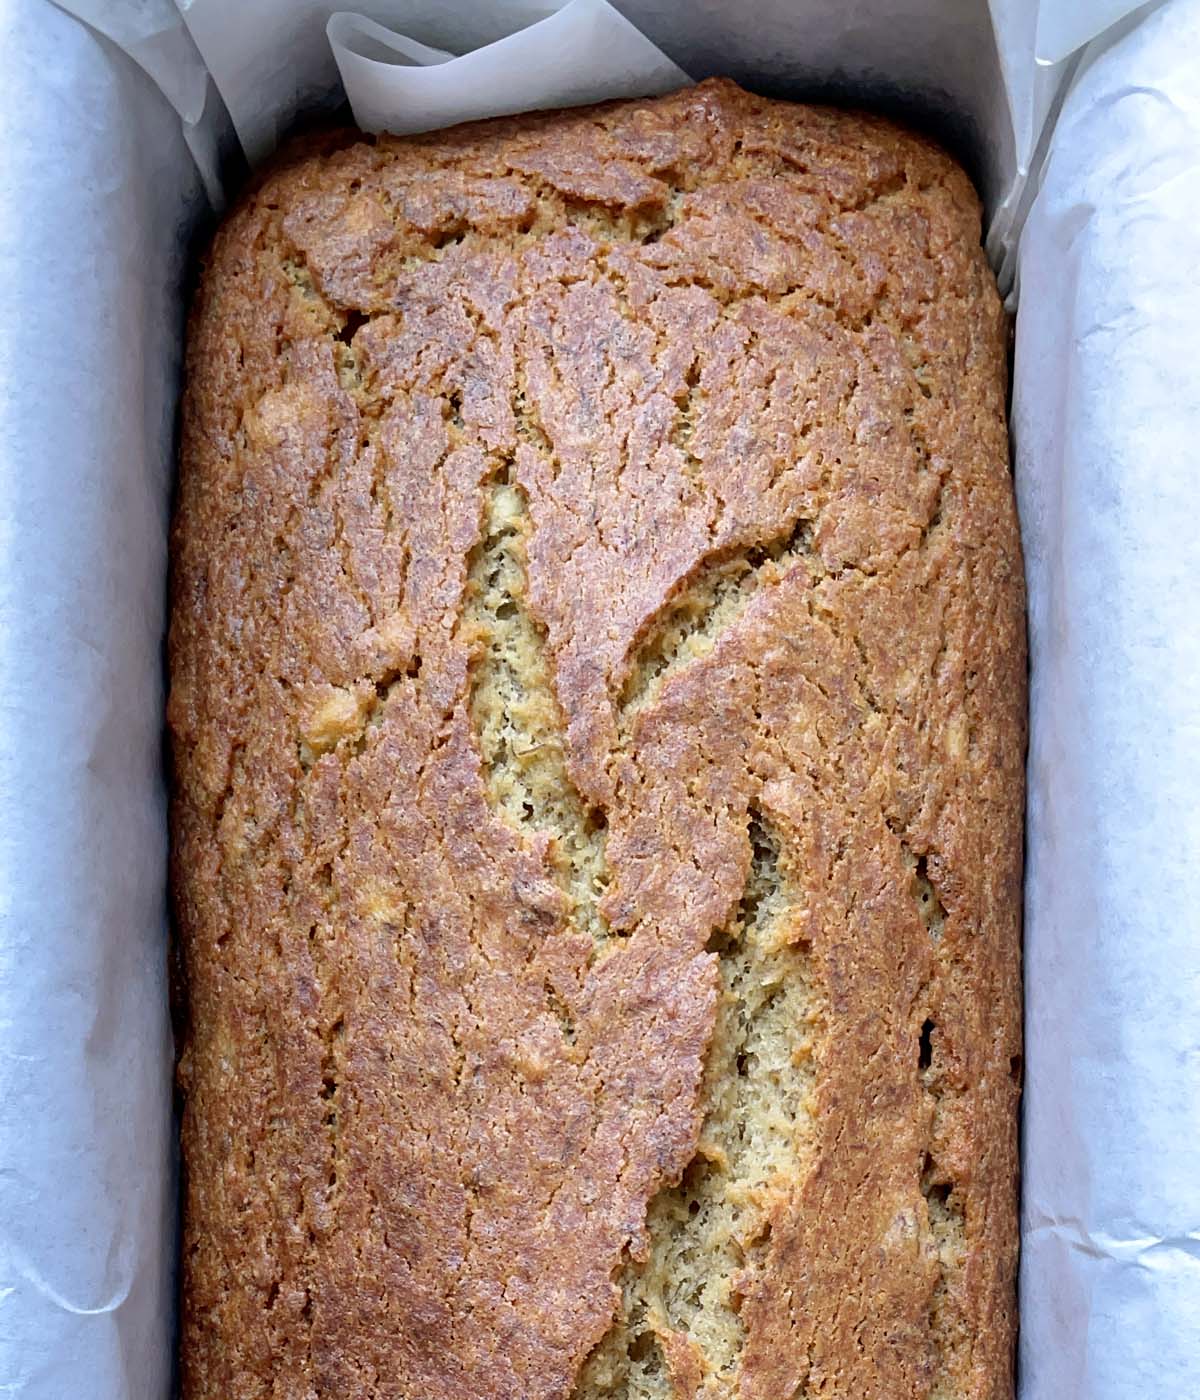 A brown baked banana bread in a paper lined pan.